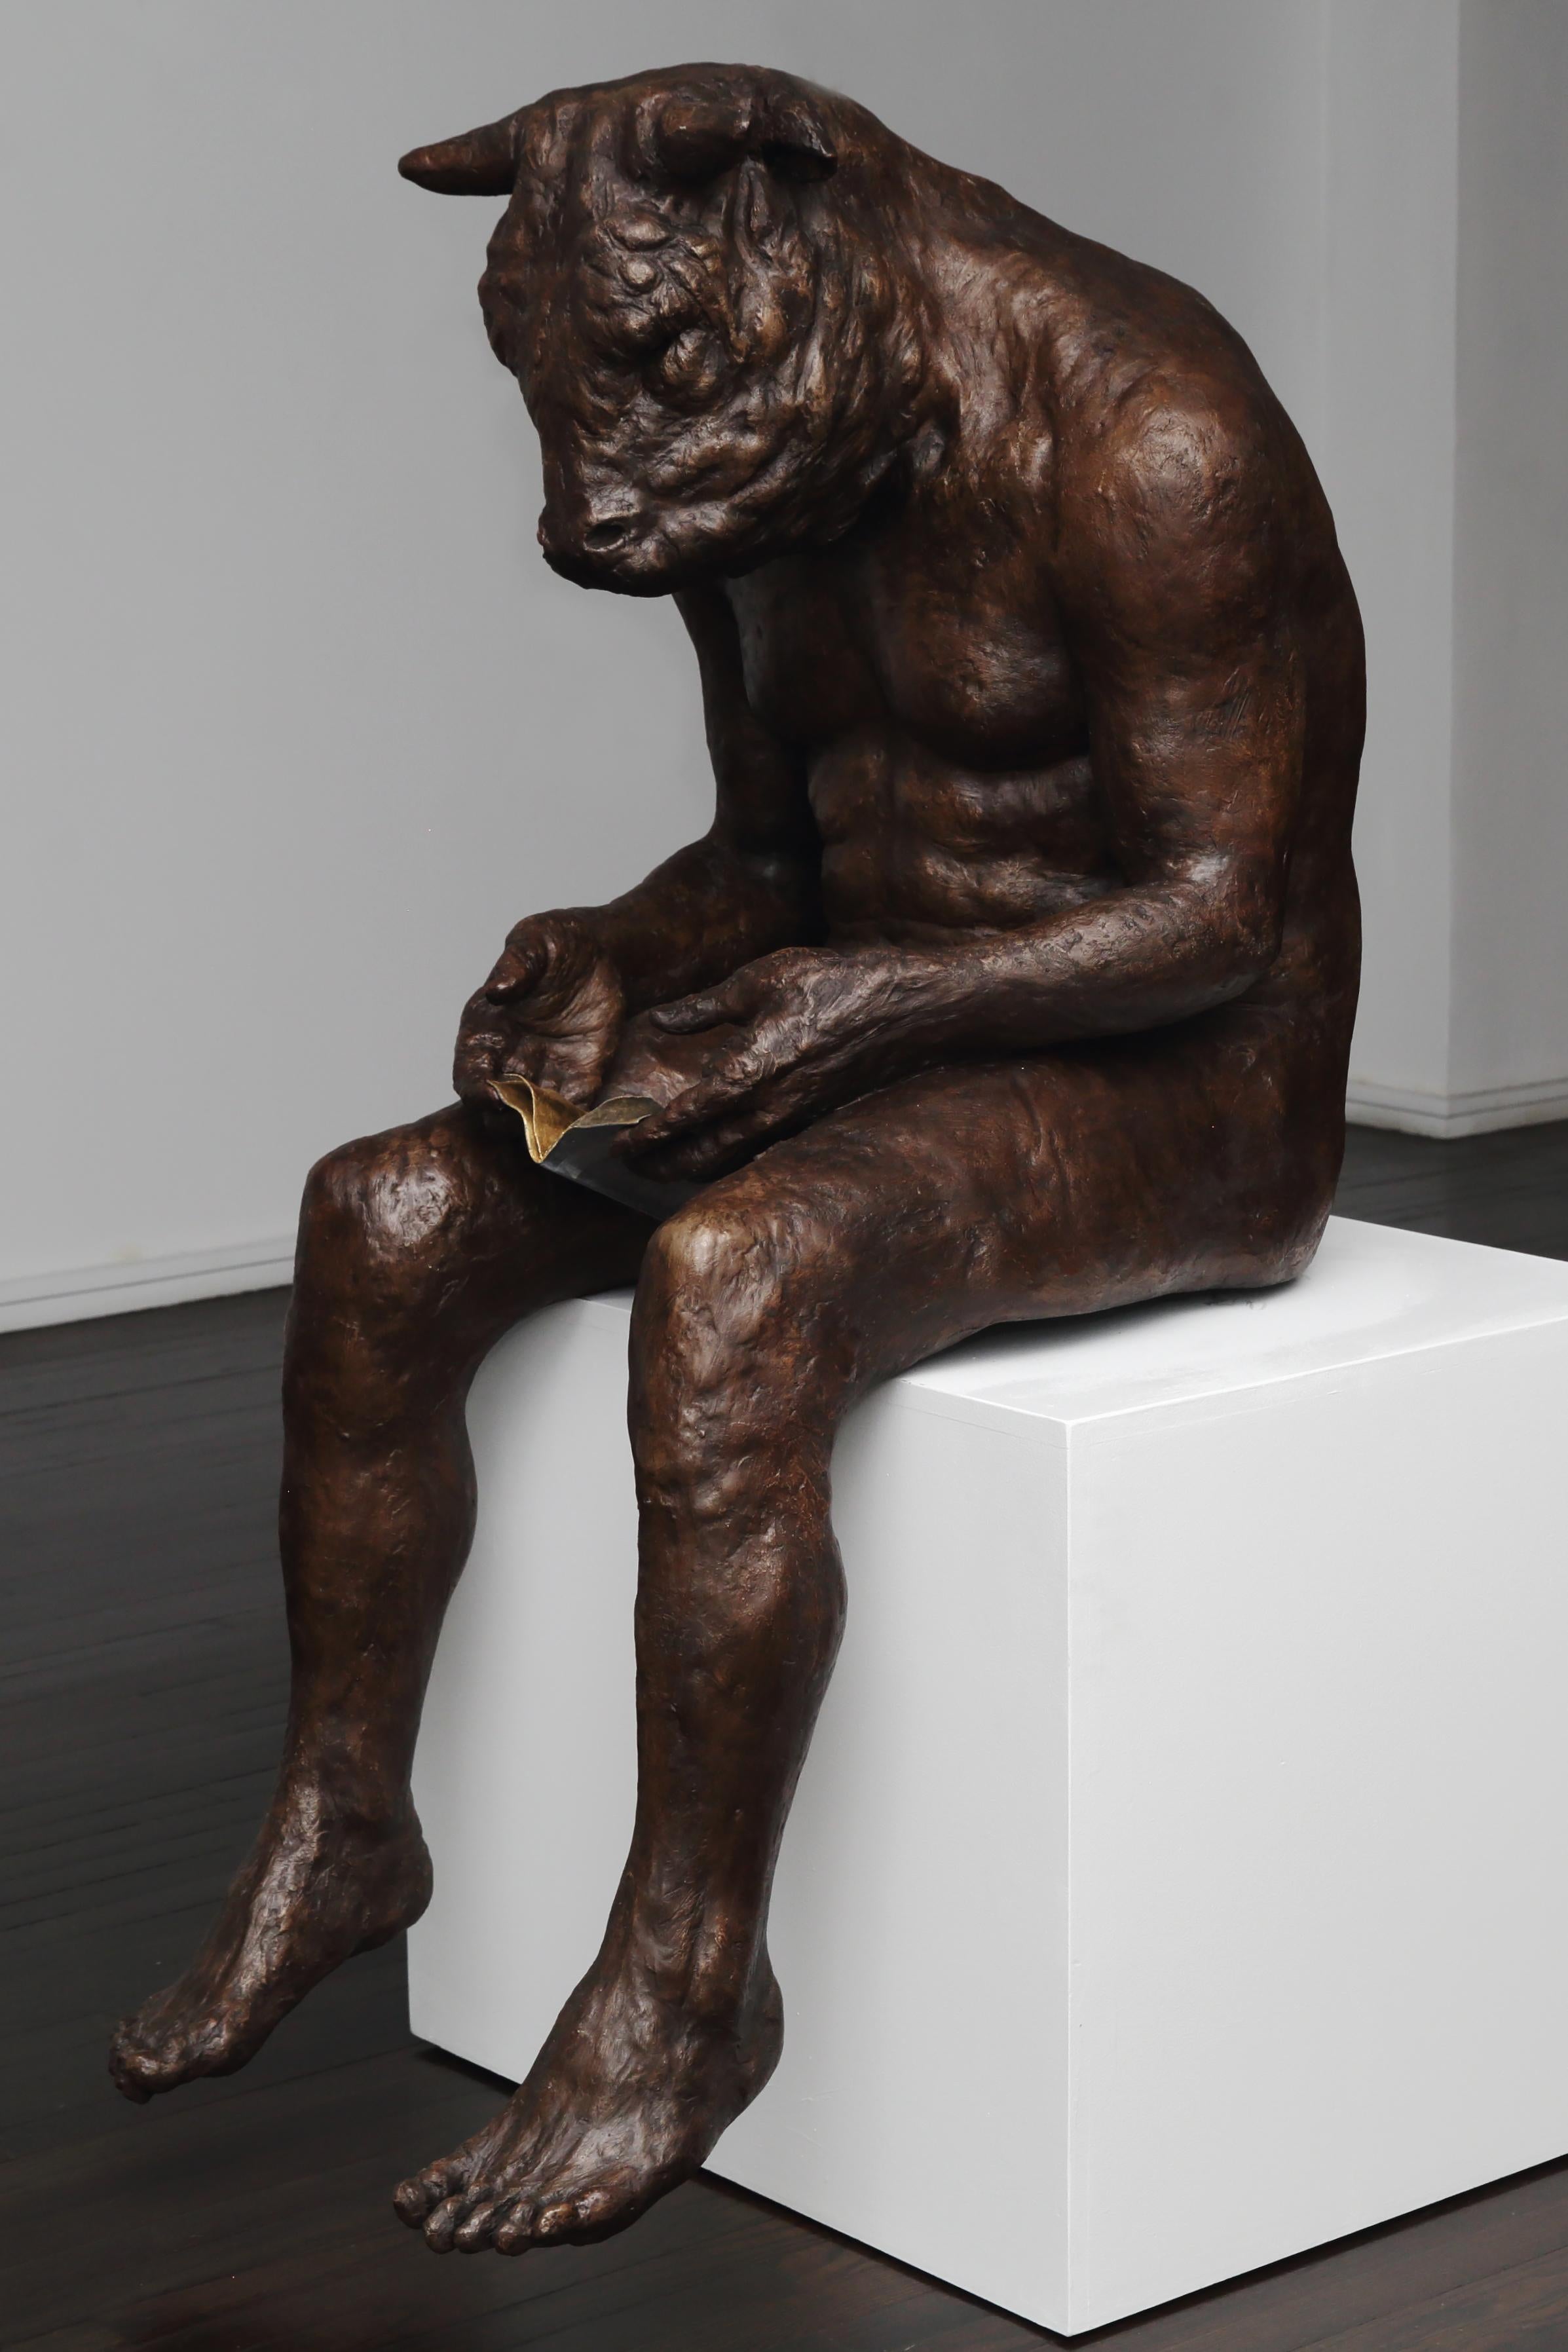 Reading Minotaur (Giant) - Gold Figurative Sculpture by Beth Carter